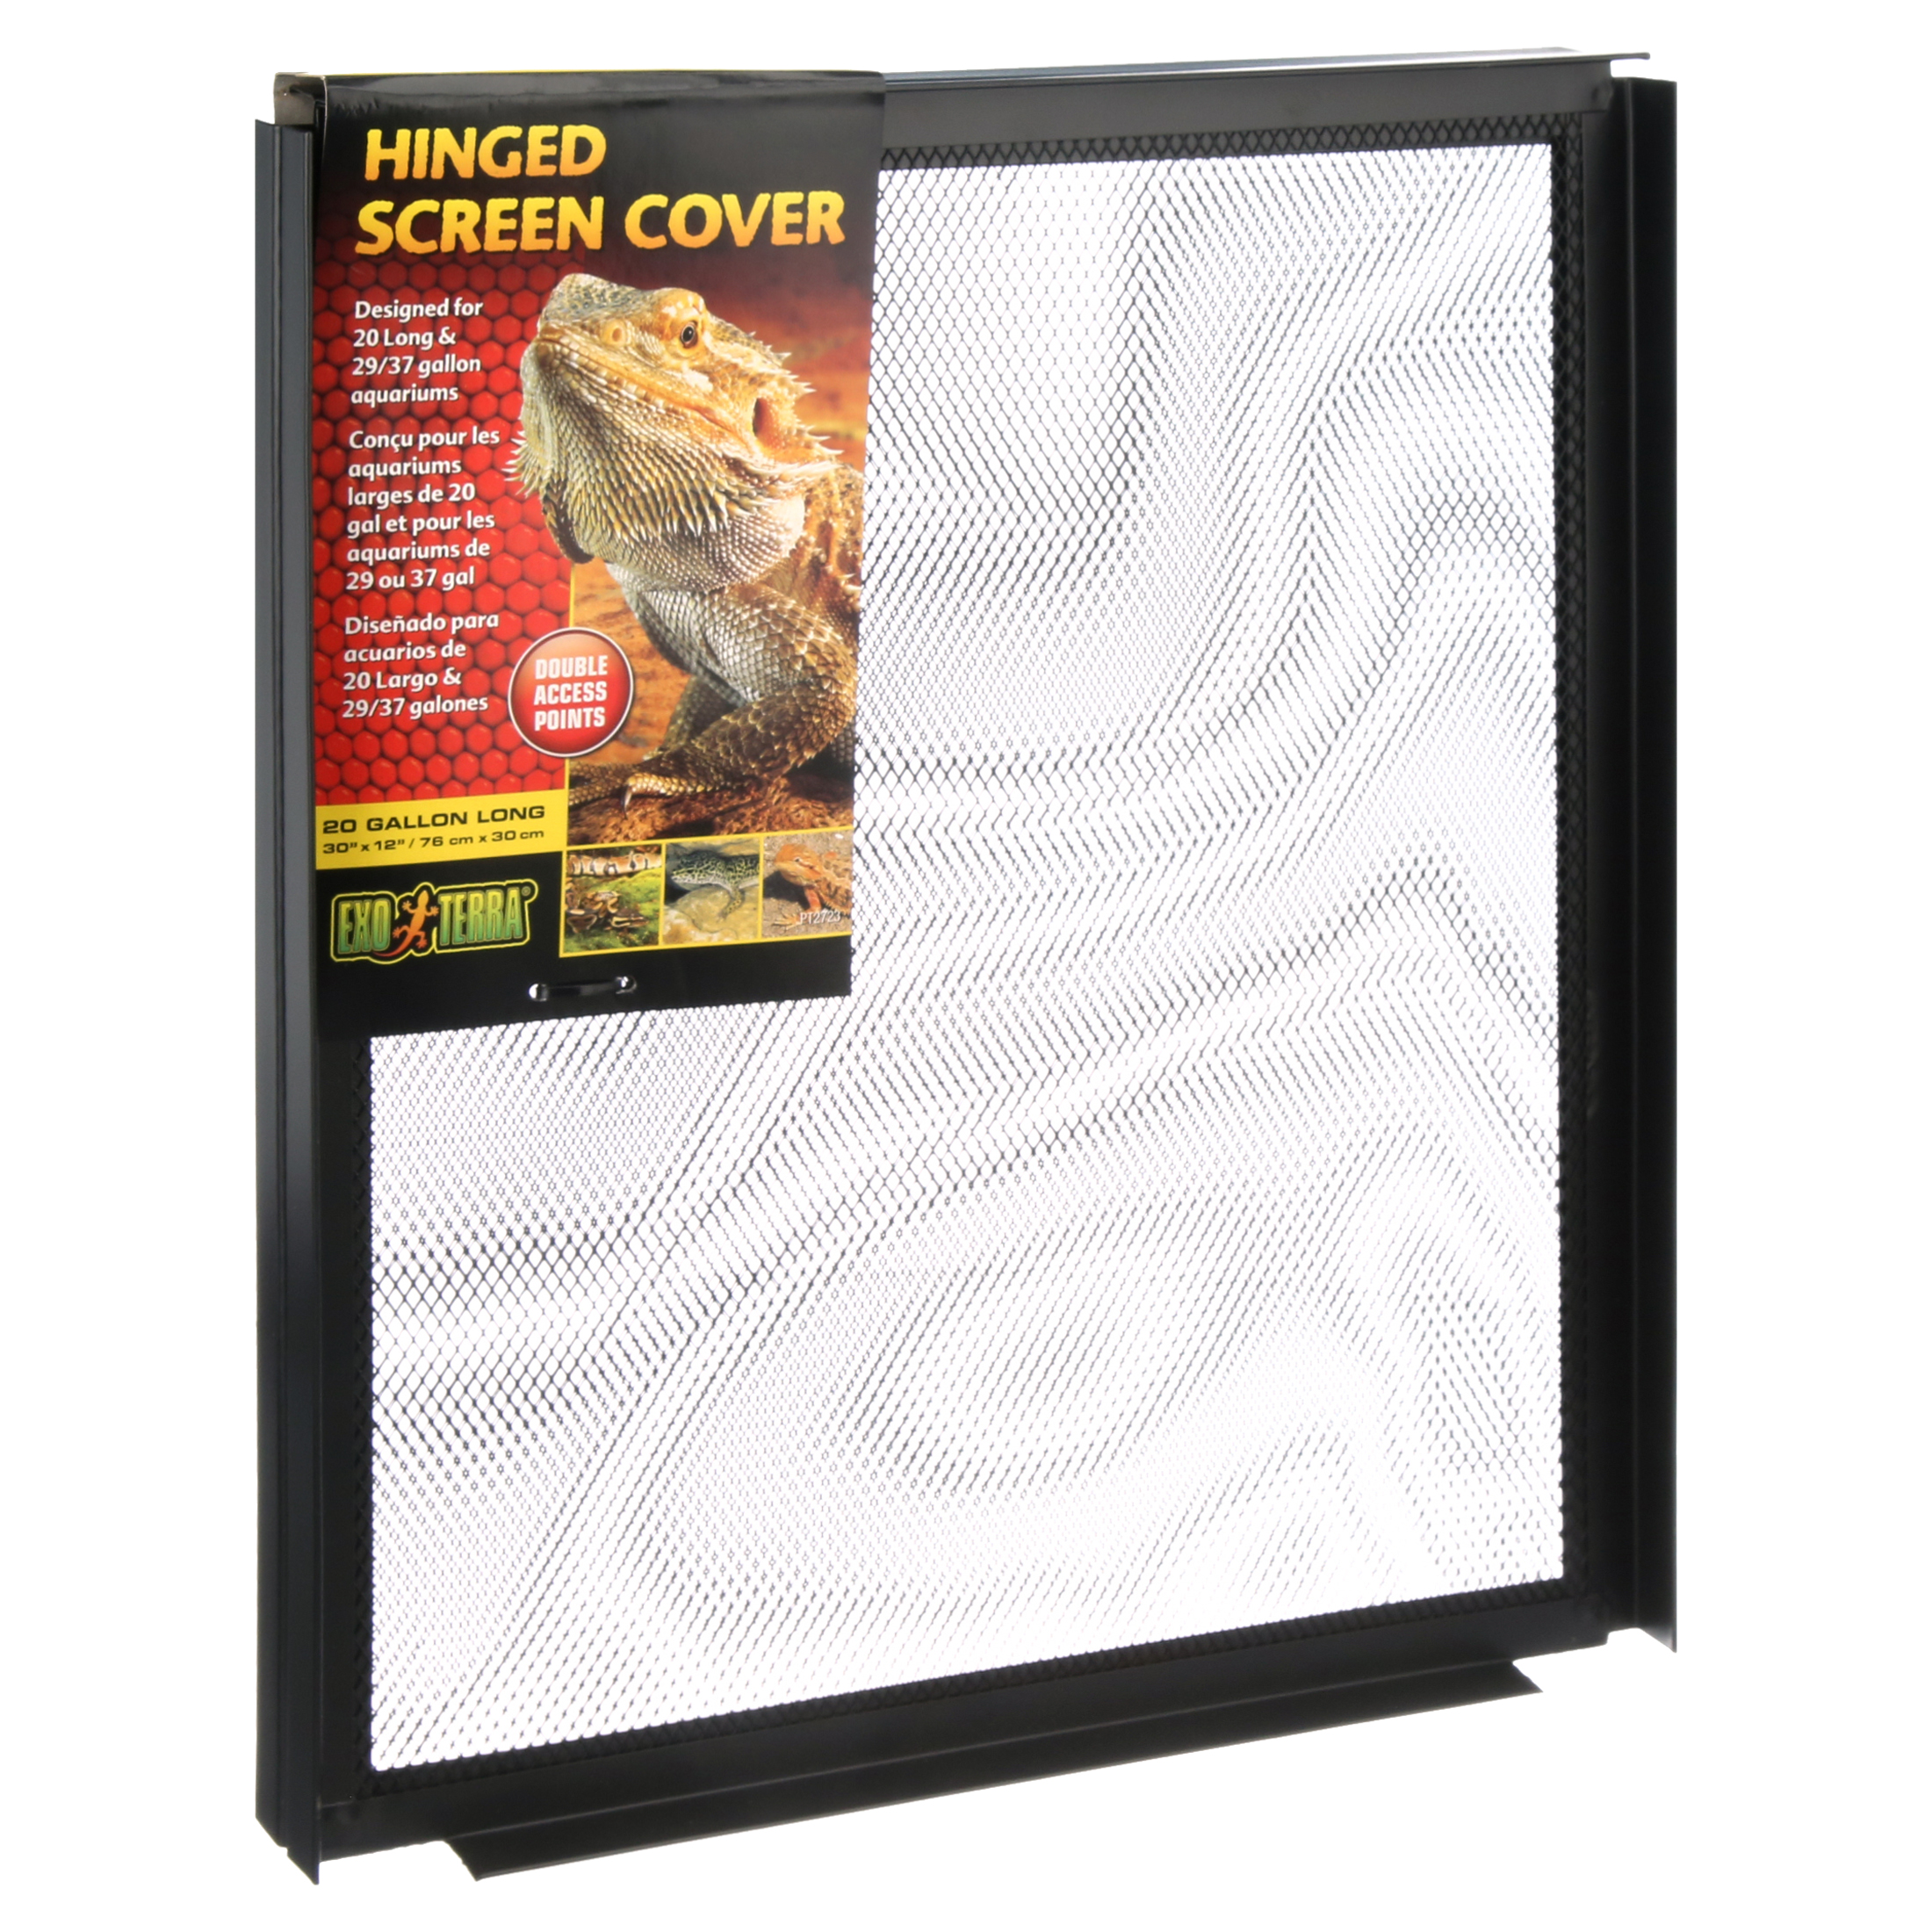 Exo Terra Screen Cover for Hinged Door, 20 to 29-Gallon - image 4 of 8